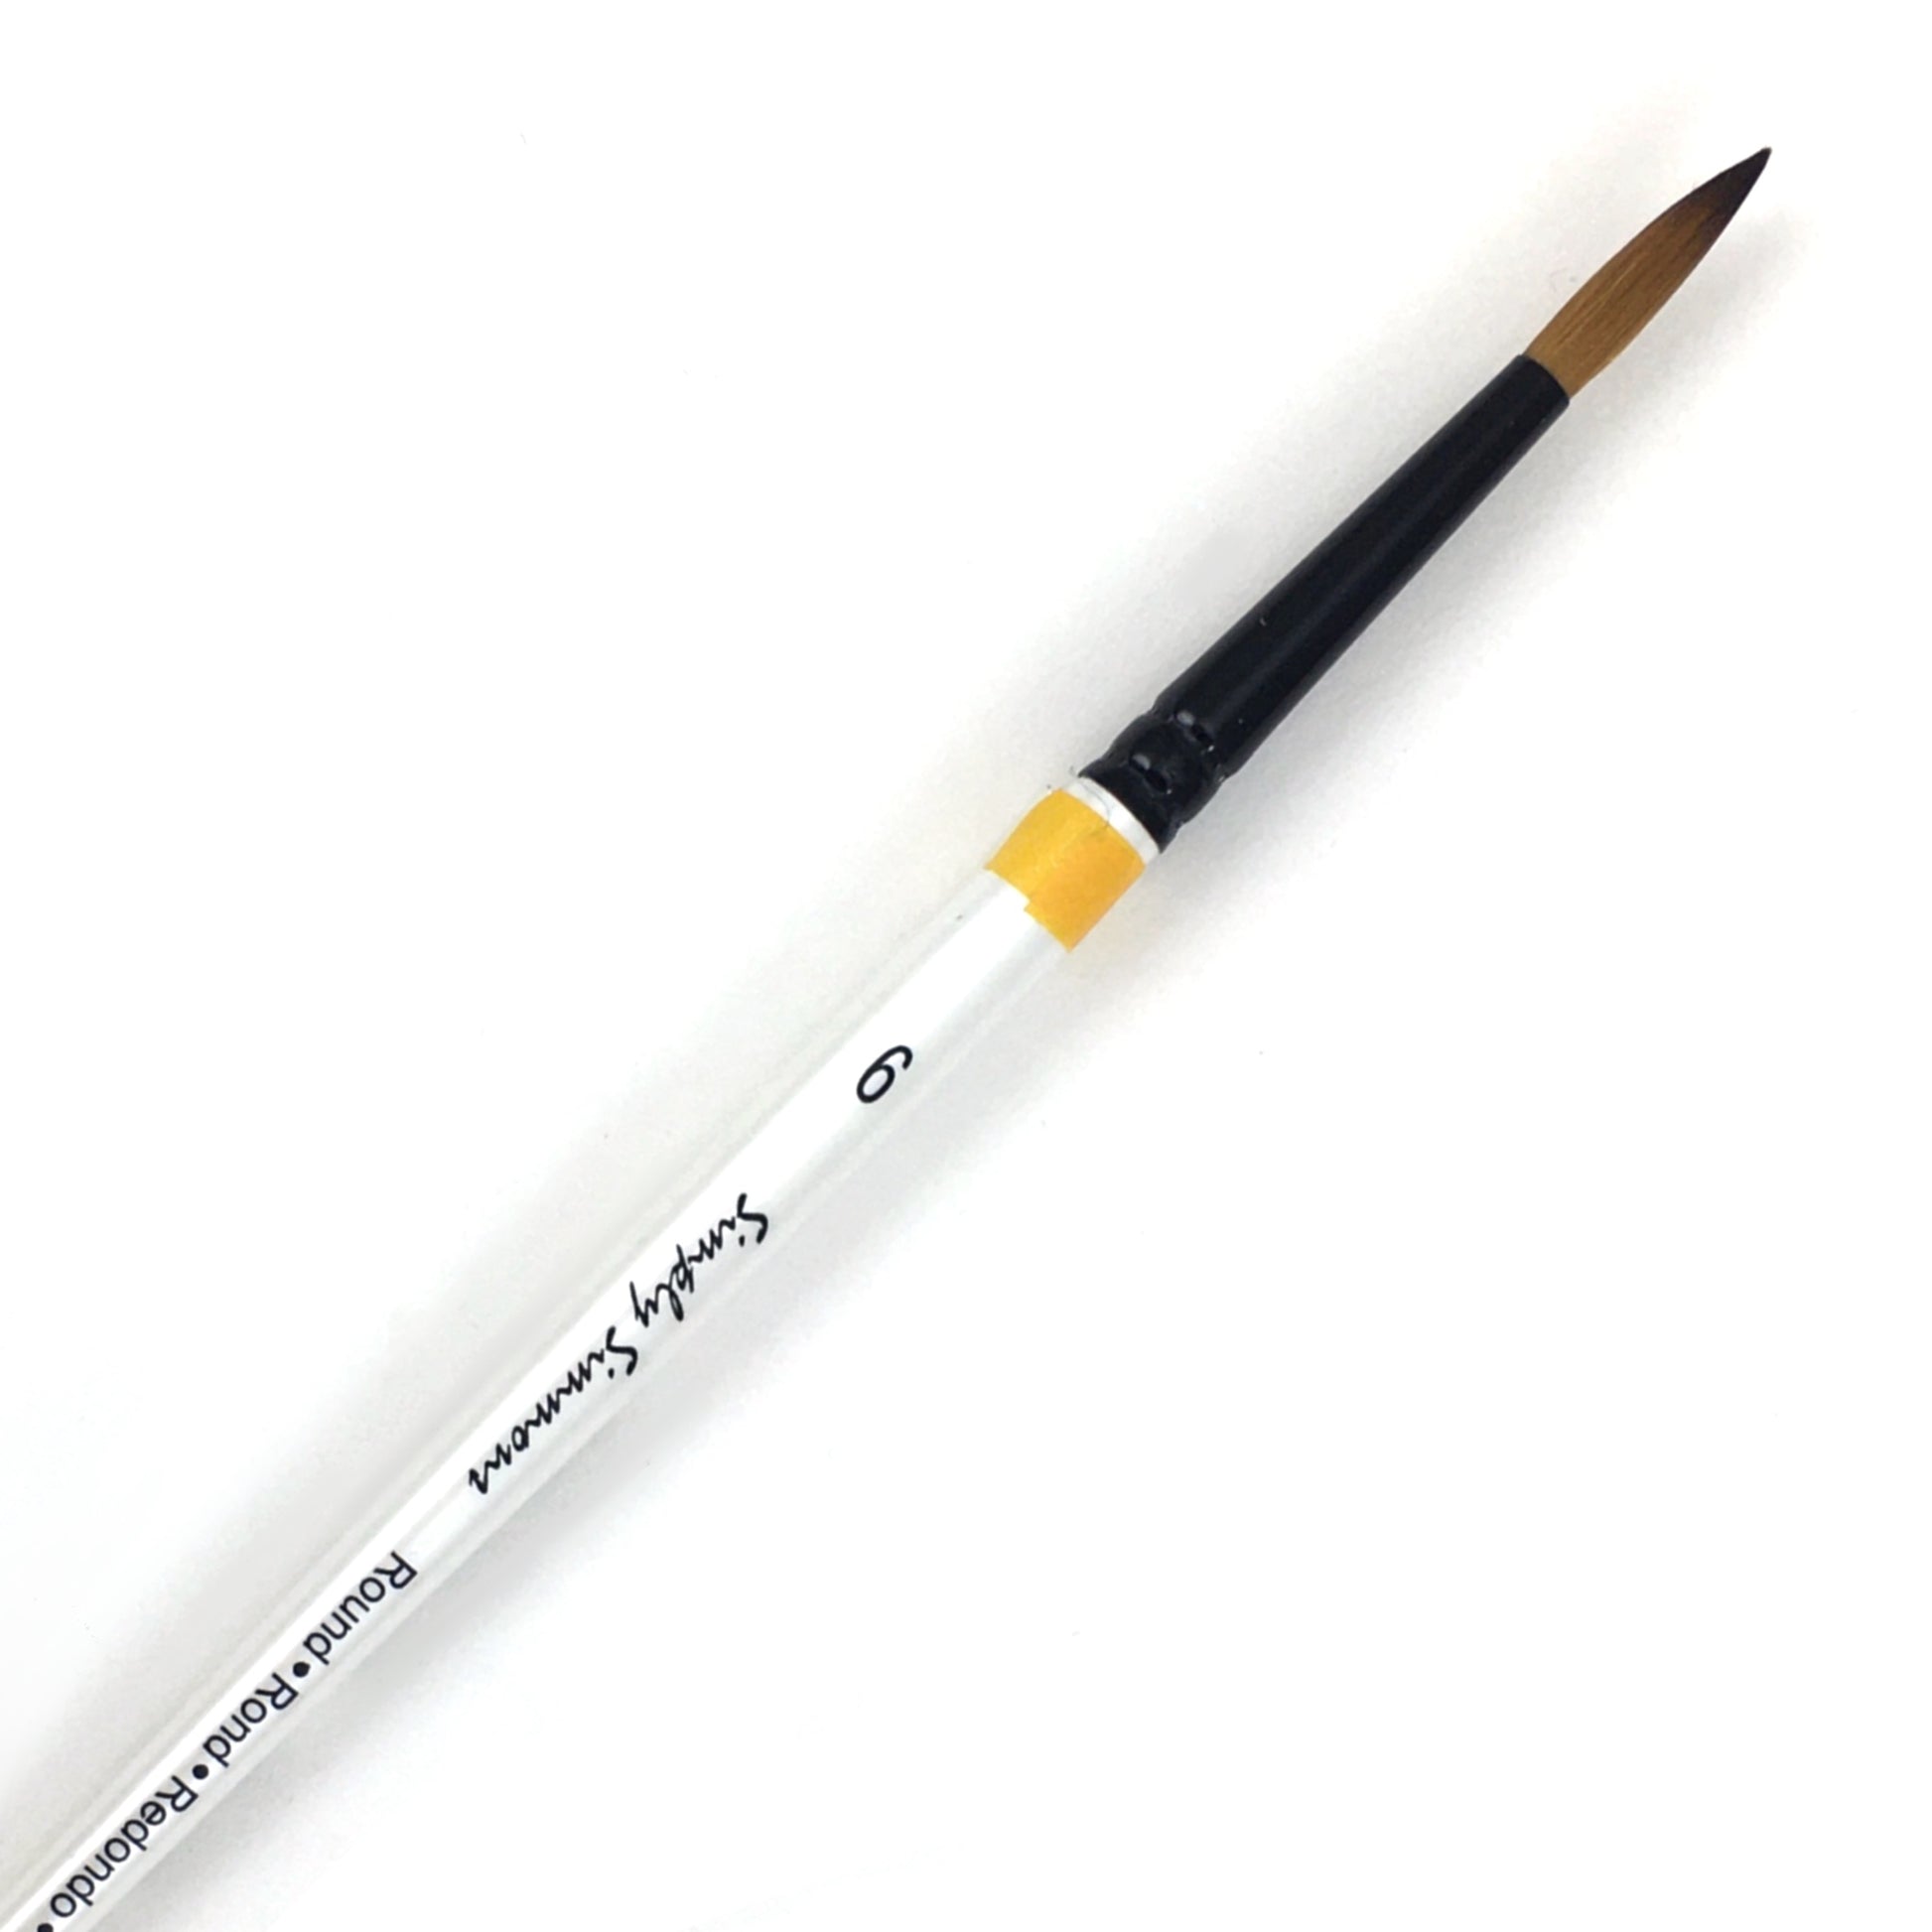 Simply Simmons All-Media Brush - Short Handle - Round / #6 by Robert Simmons - K. A. Artist Shop